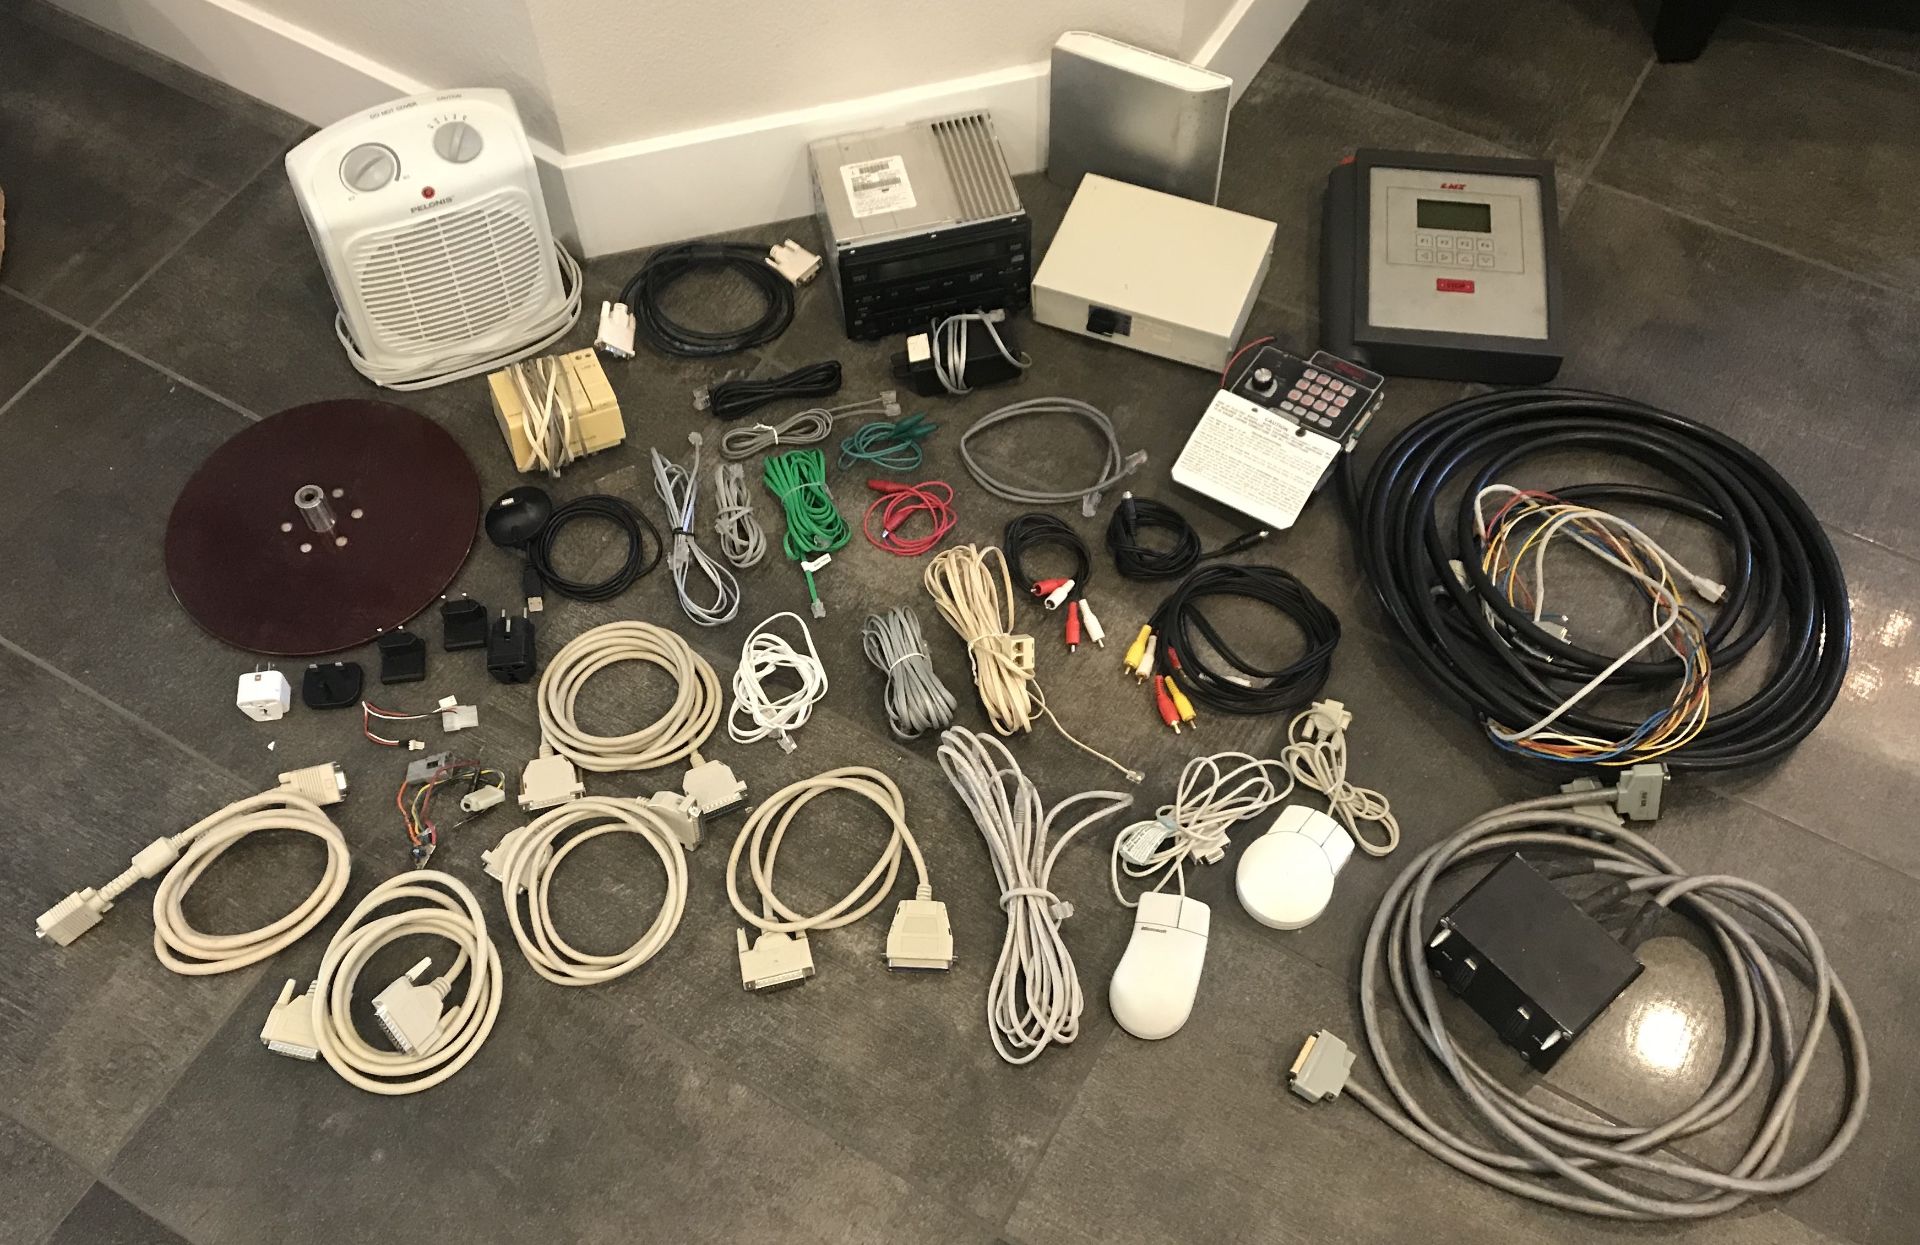 ASSORTED LOT OF ELECTRONIC OUTLETS, WIRES, SWITCH BOX, PORTABLE HEATER, CAR RADIO AND COMPUTER MICE.